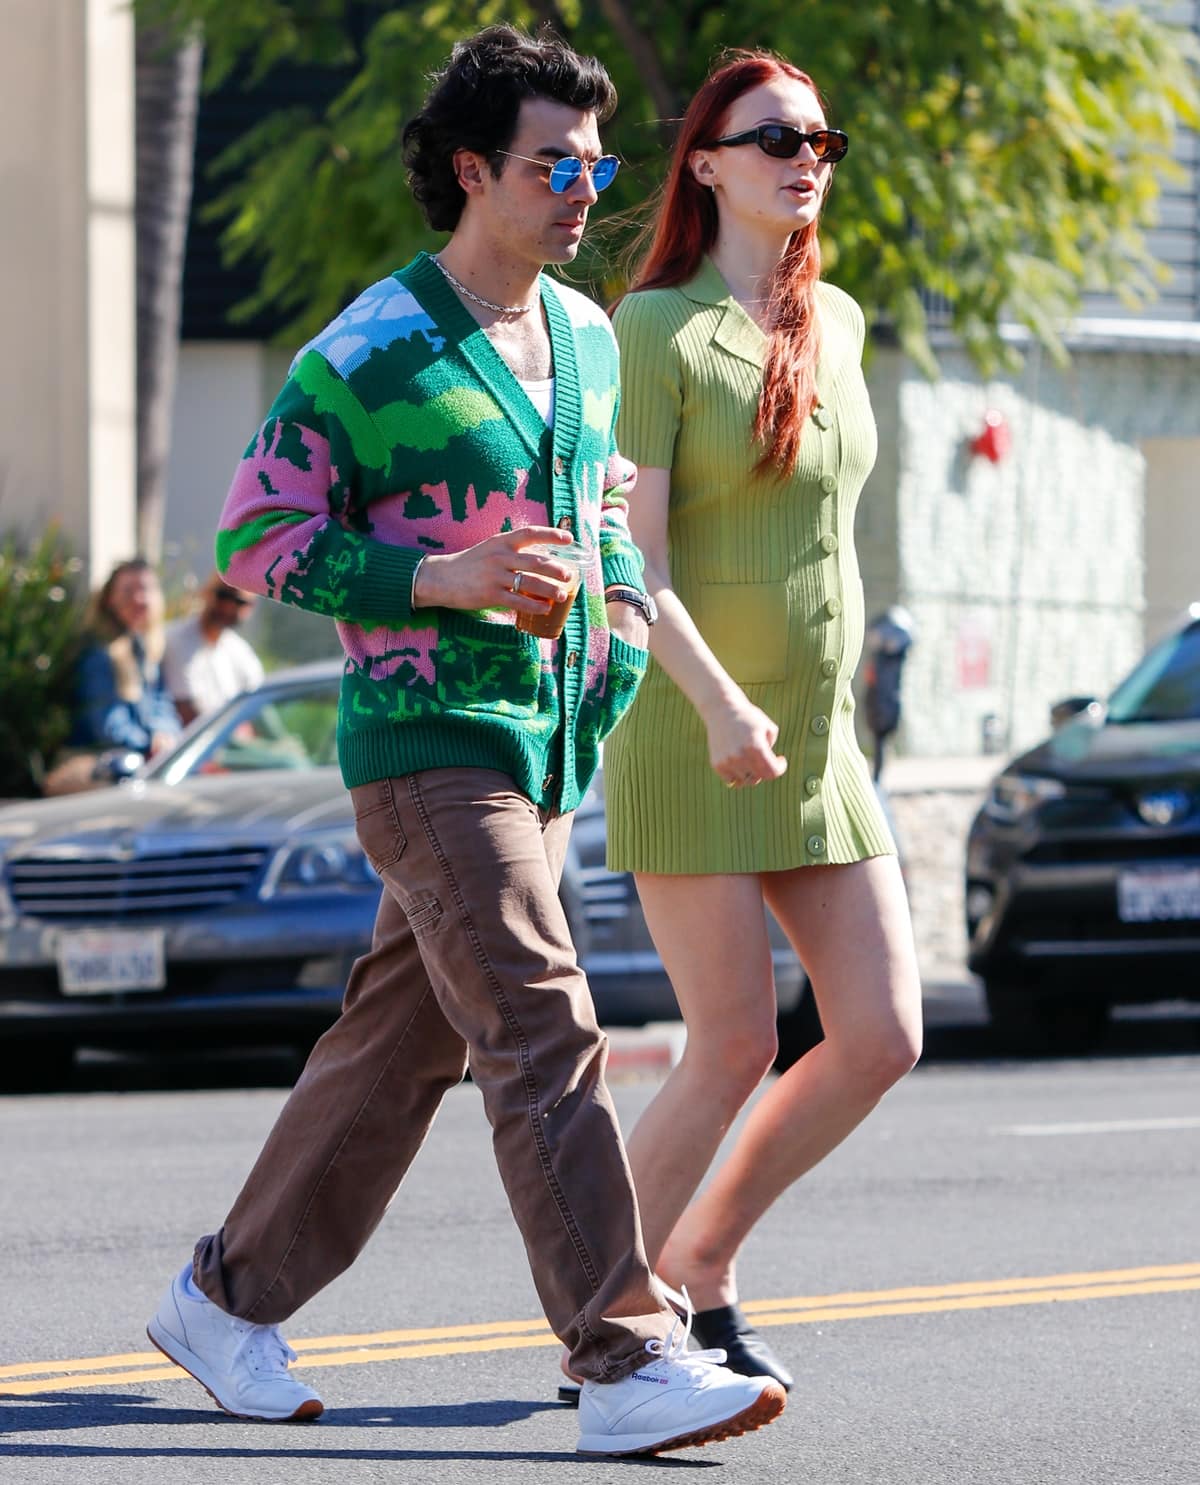 Sophie Turner styled her apple green dress with Vagabond Katlin mules and Thierry Lasry Victimy sunglasses